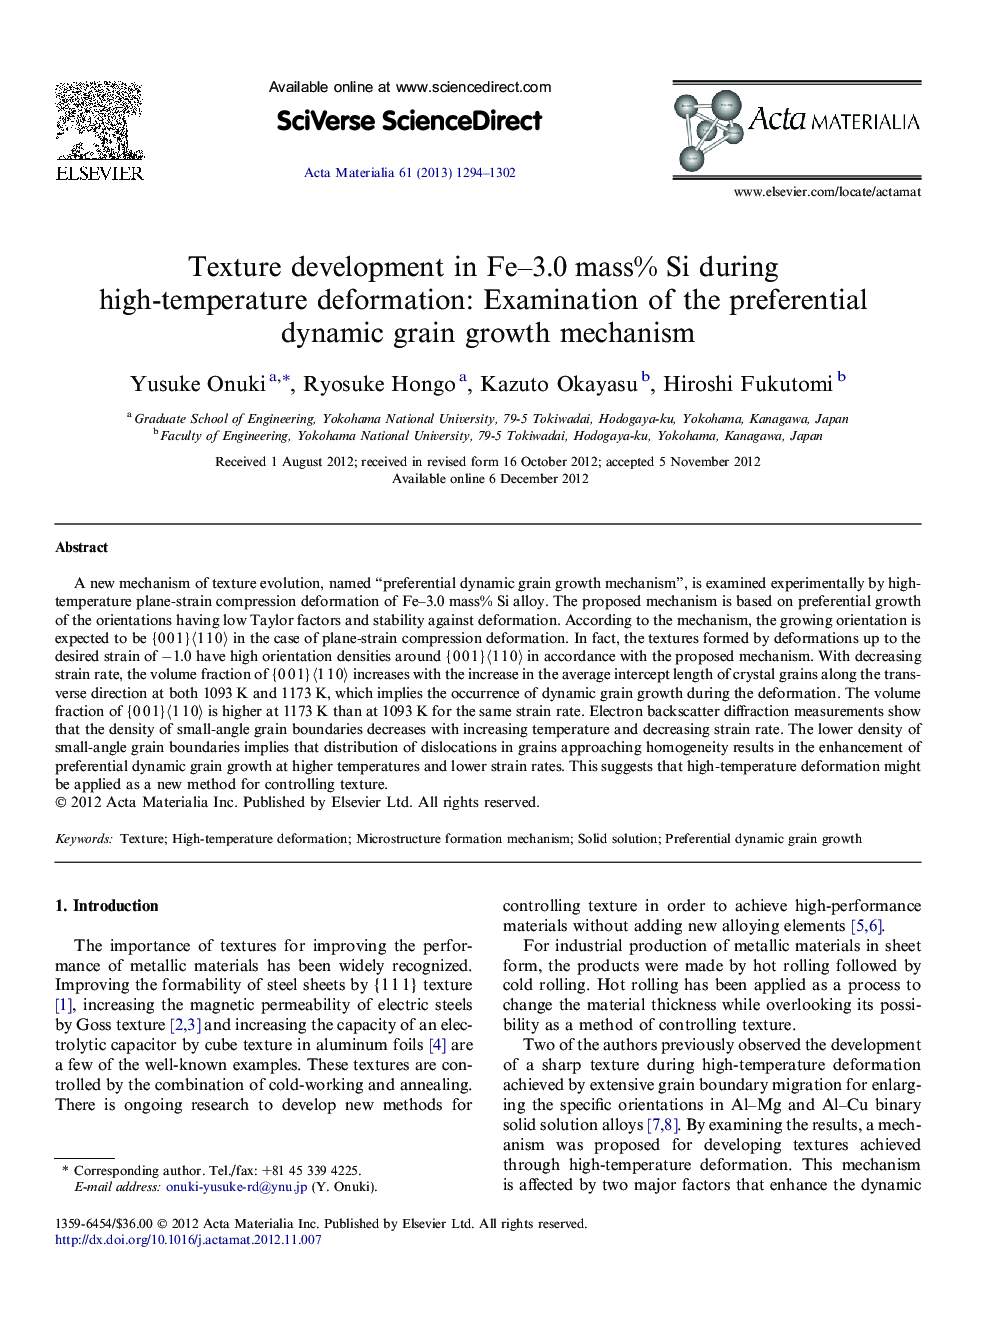 Texture development in Fe–3.0 mass% Si during high-temperature deformation: Examination of the preferential dynamic grain growth mechanism